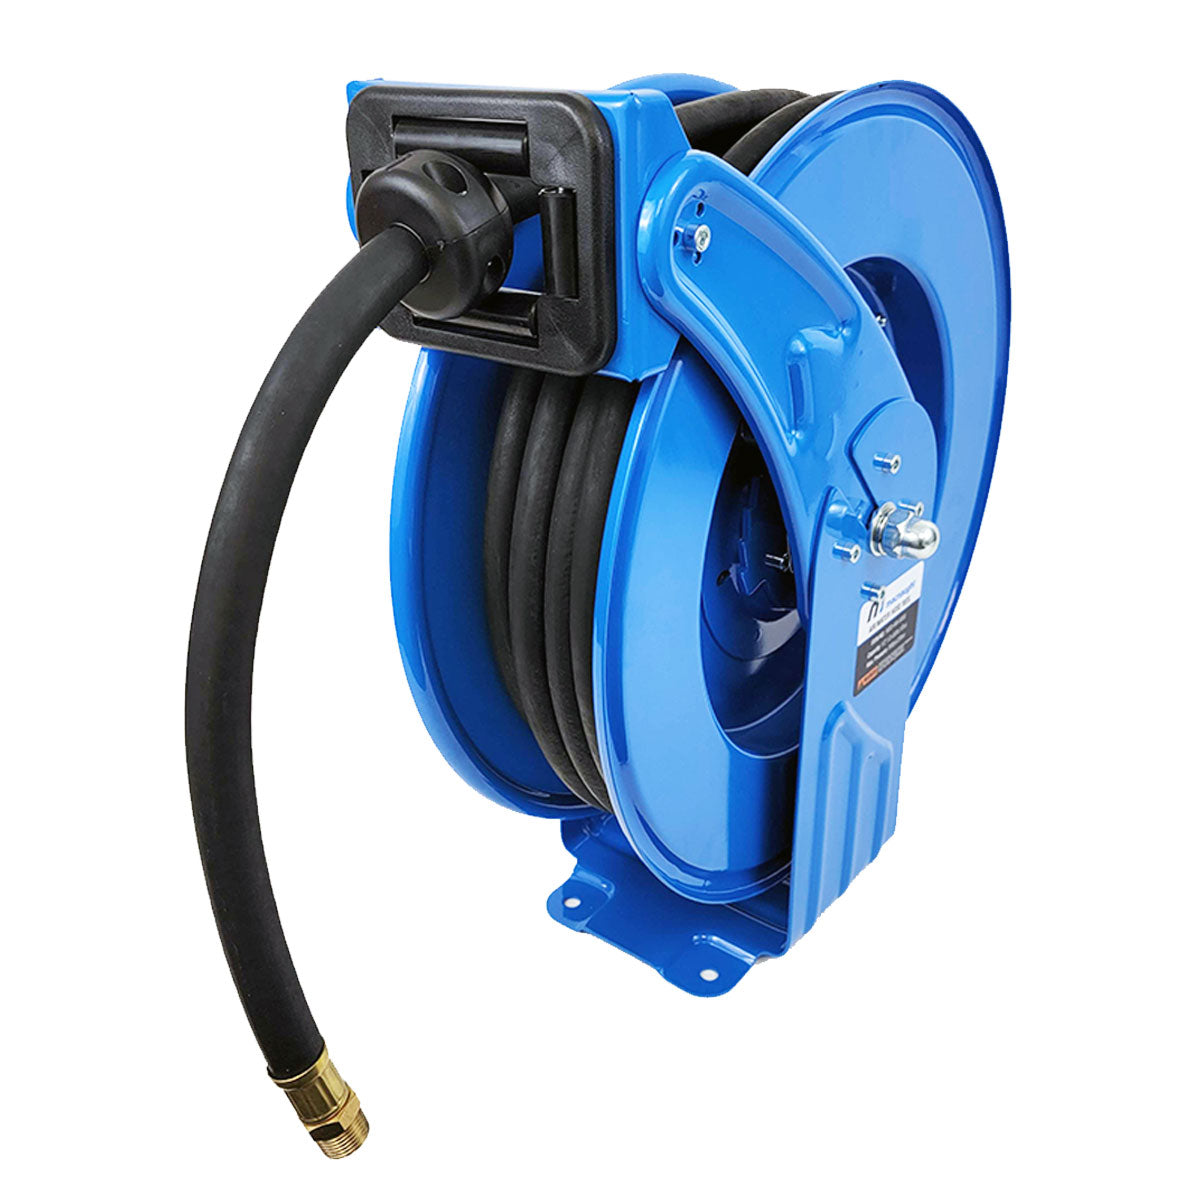 Retractable Wall Mounted Hose Reel for Diesel Supply at Farmyard